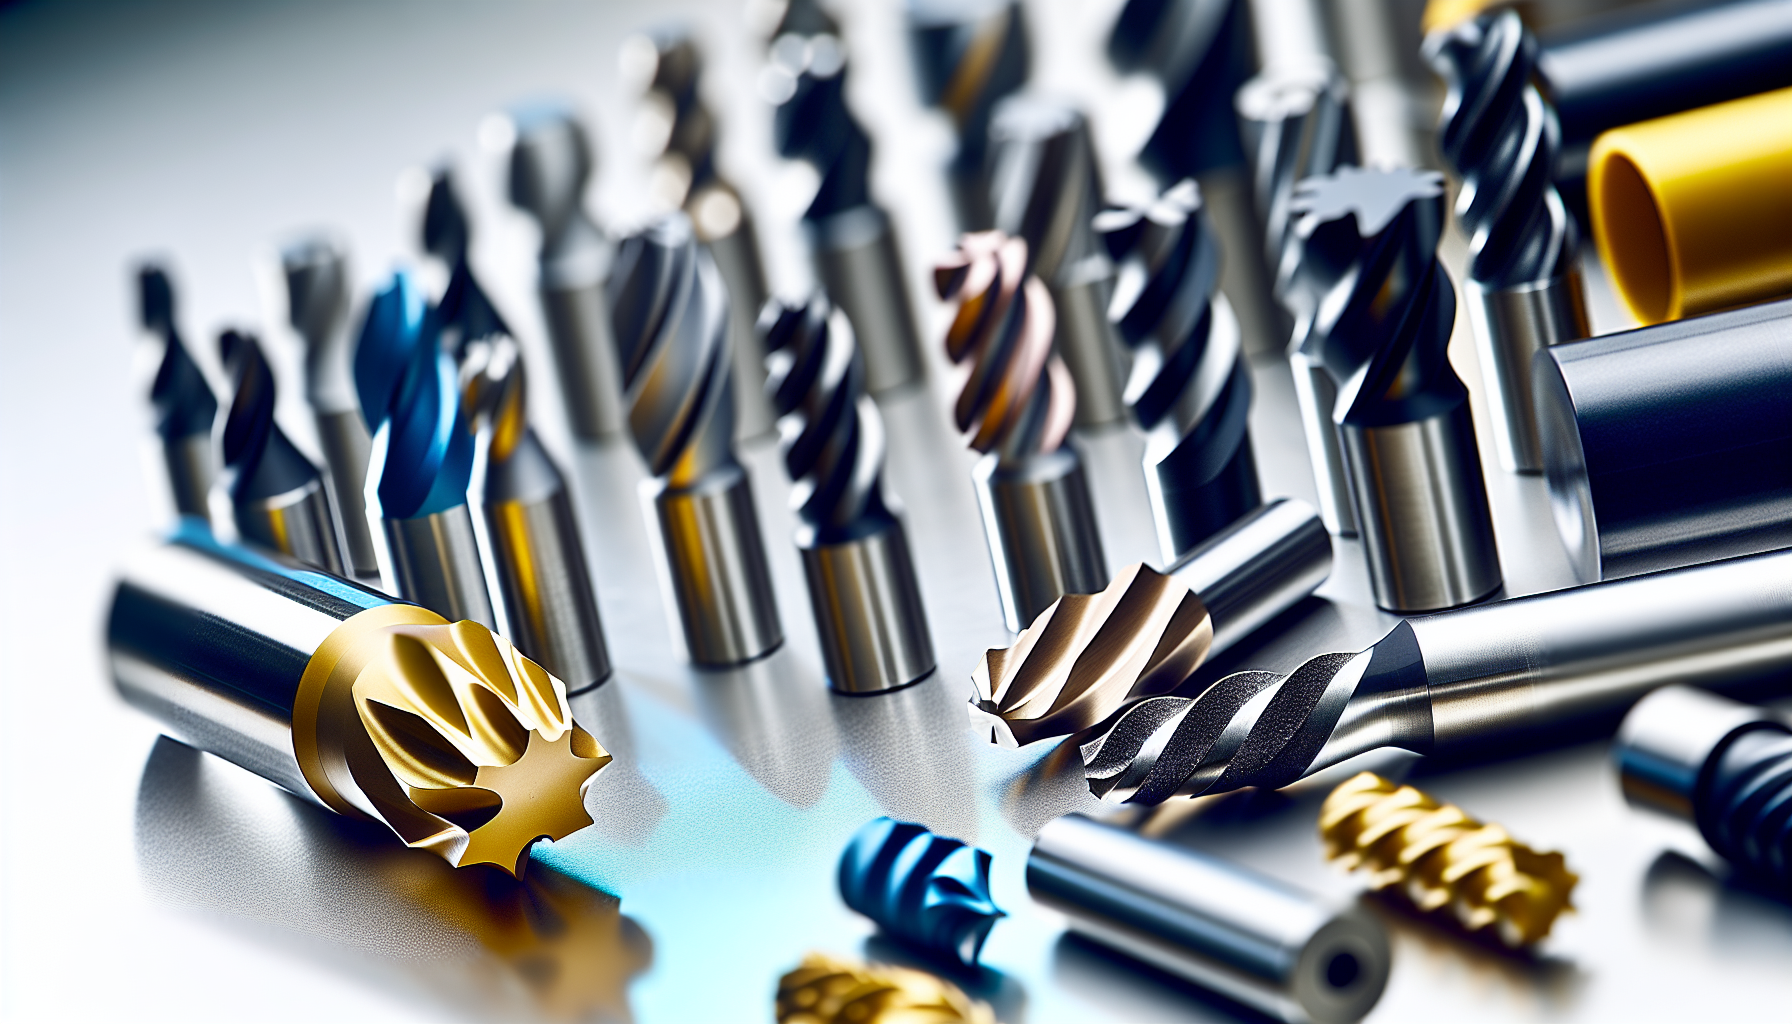 High speed machining tool selection